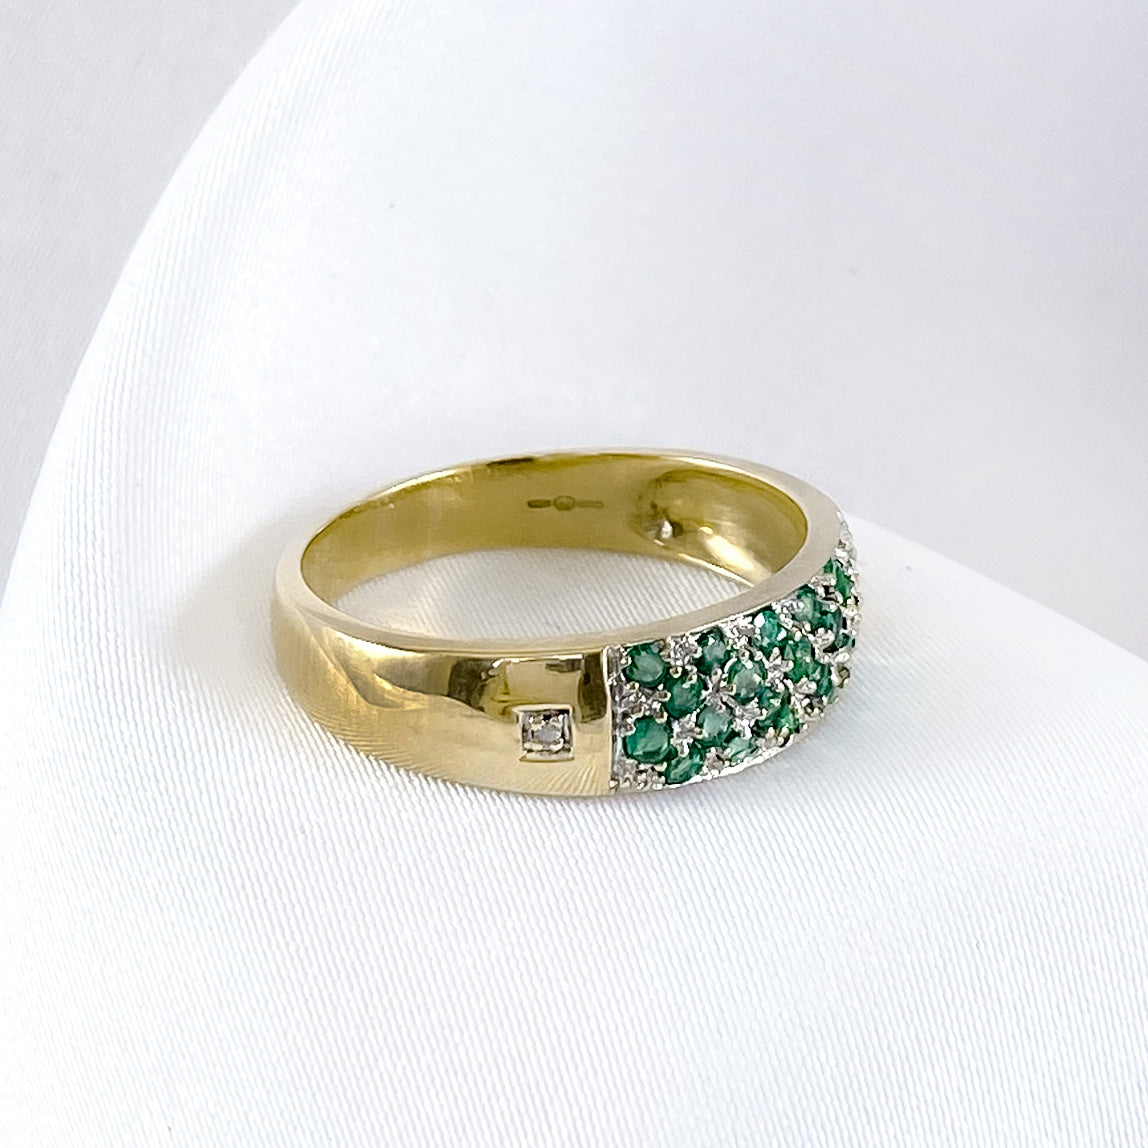 Vintage Emerald and Diamond Band Ring